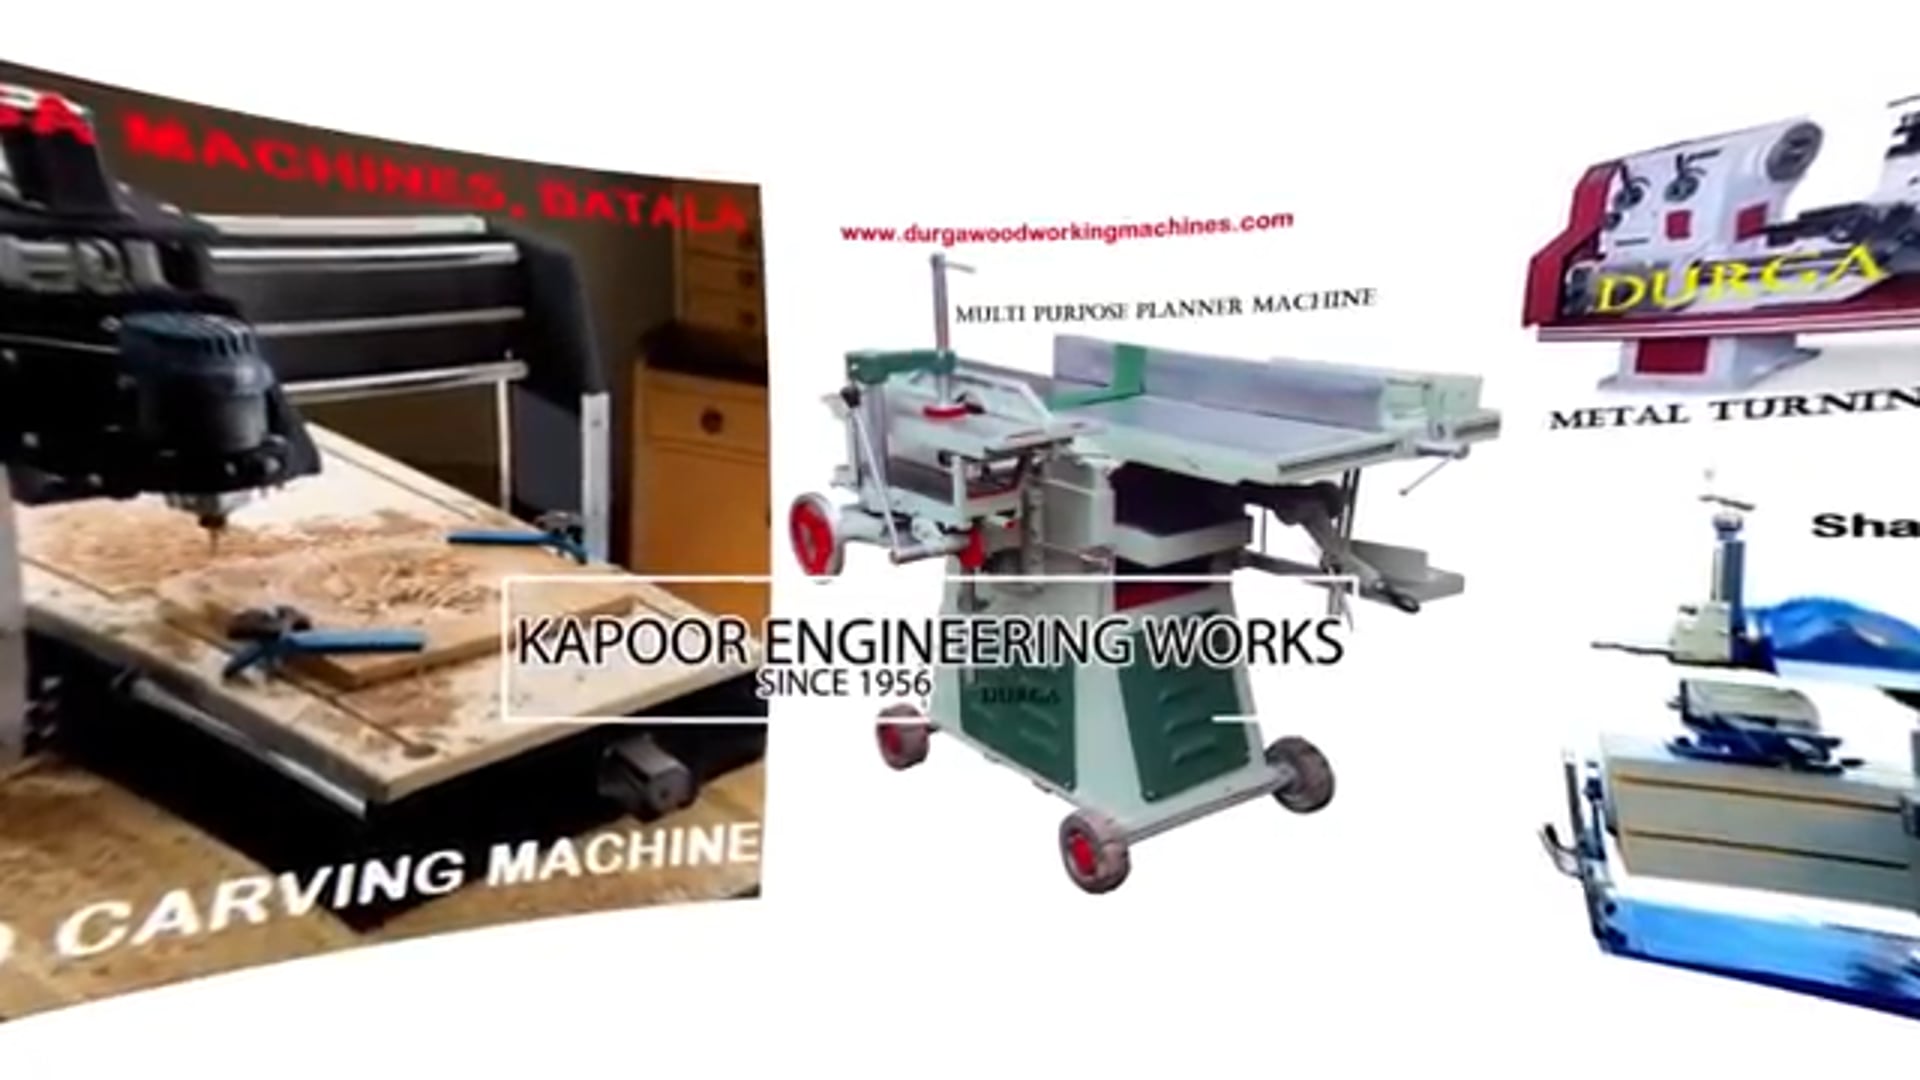 Wood Working and Metal Working Machines Manufacturers from Batala, Punjab (India)